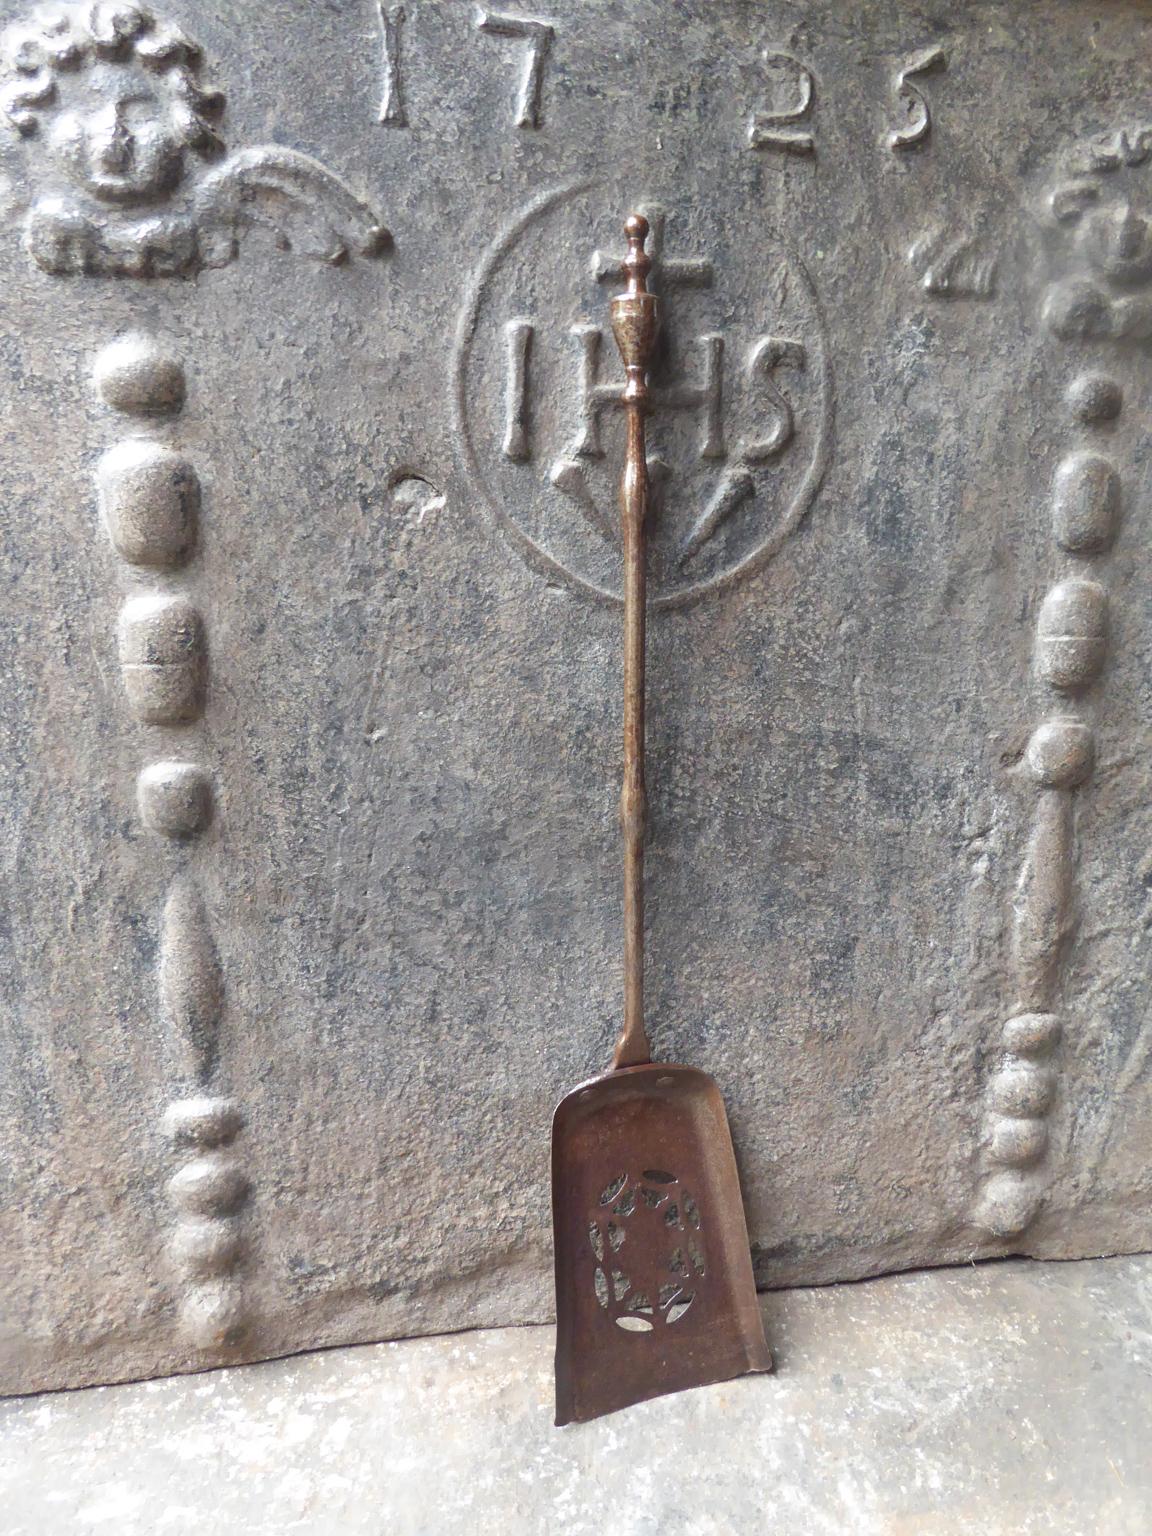 18th-19th century English Georgian fireplace shovel made of wrought iron. The shovel is in a good condition and is fully functional.